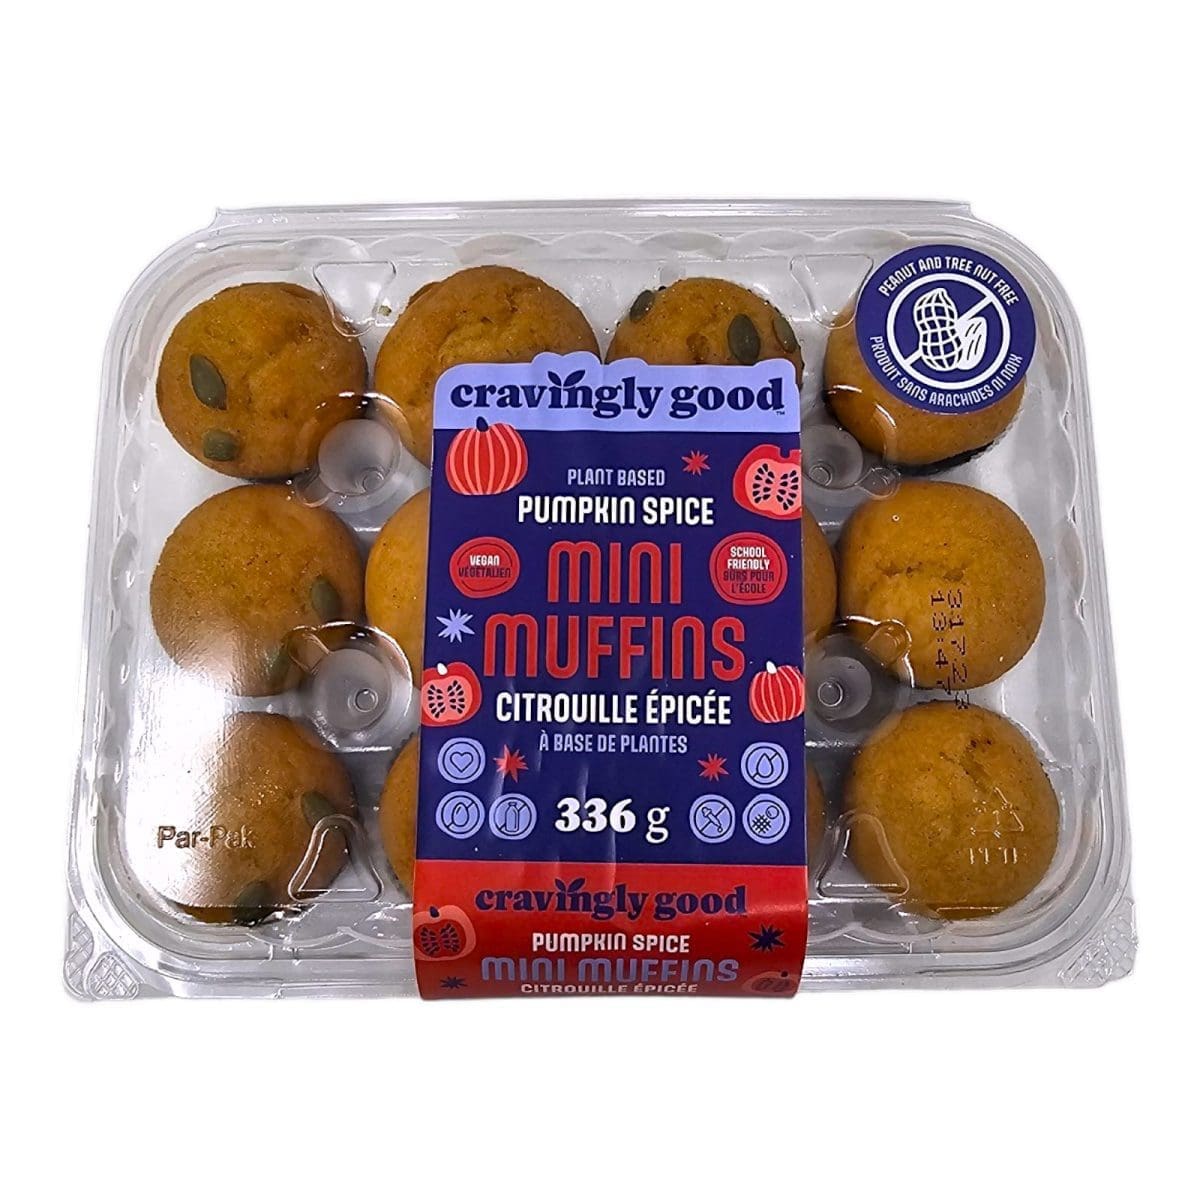 Cravingly good Plant Based Pumpkin Spice Mini Muffins (336g)